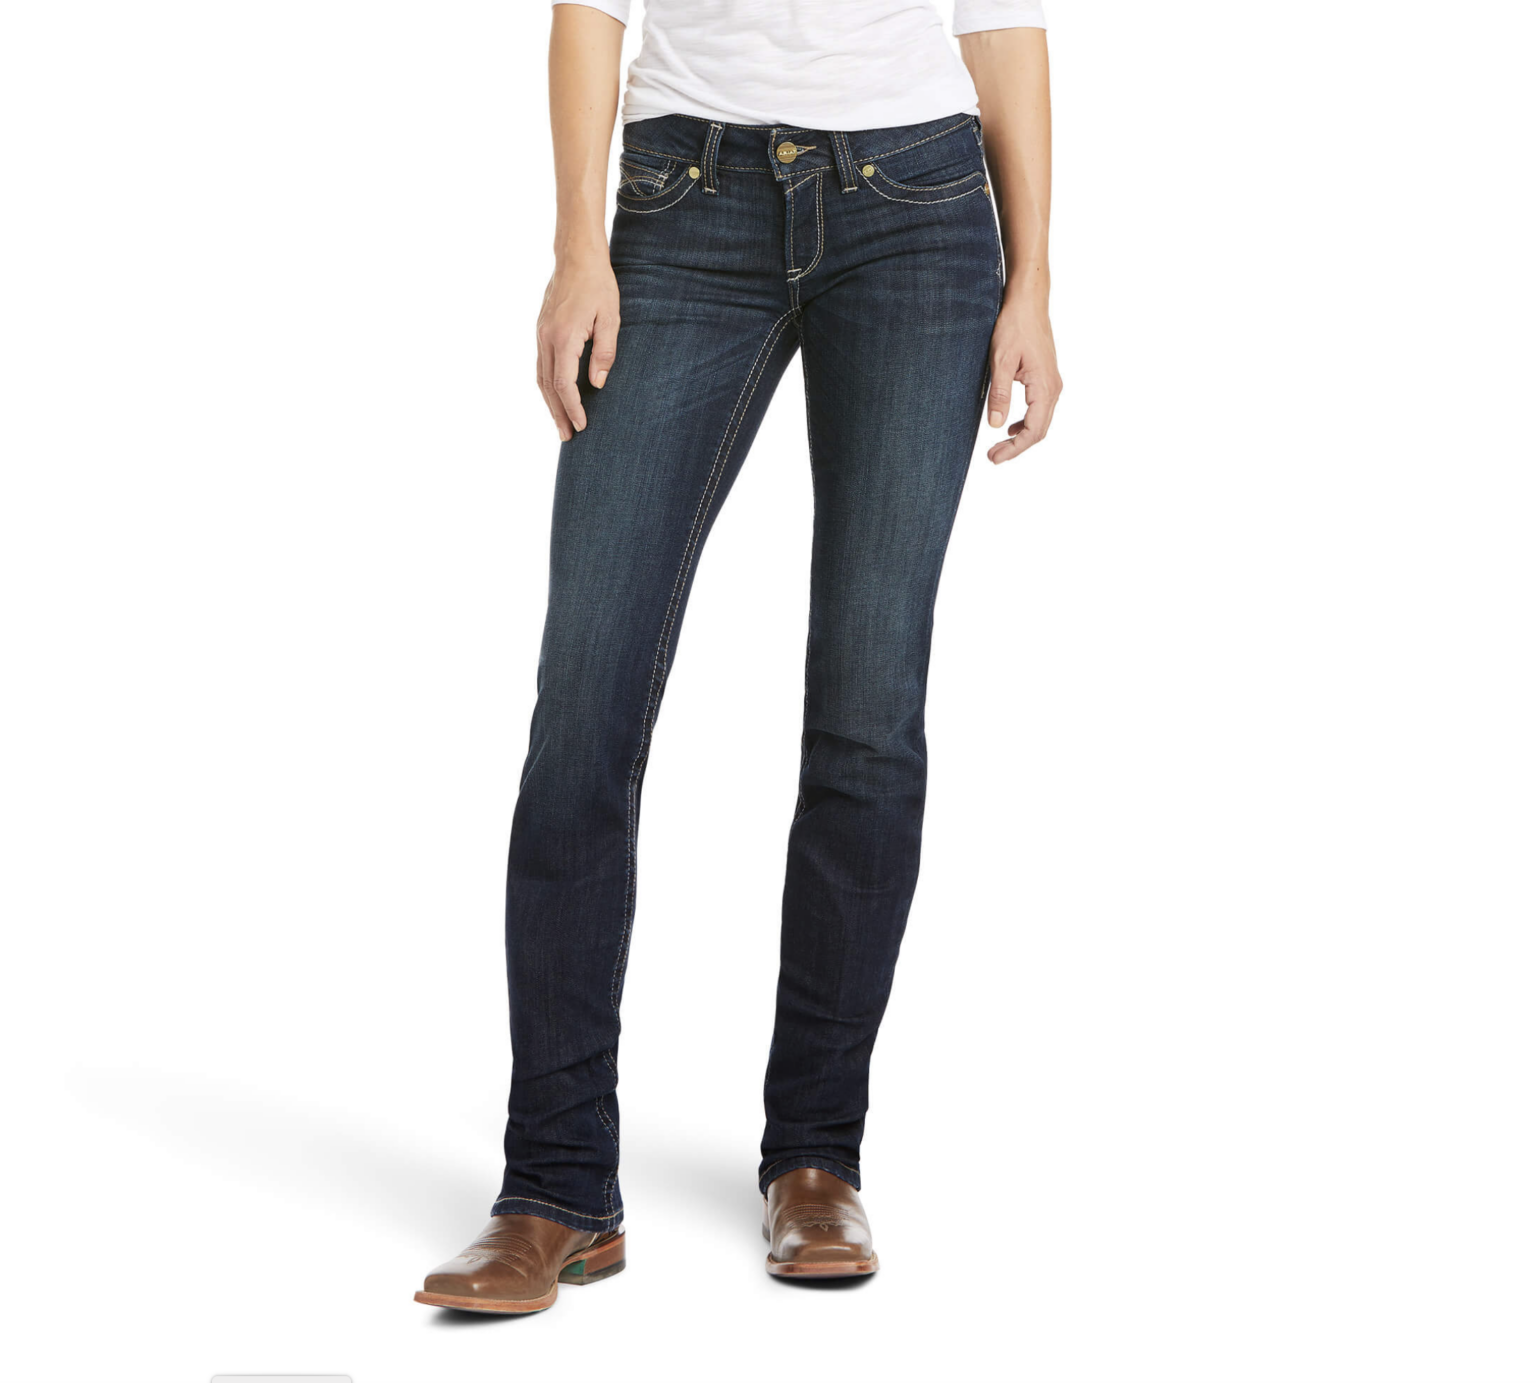 Ariat Women's Jeans 'REAL Kylee' Mid Rise Arrow Fit Straight Leg Deep ...